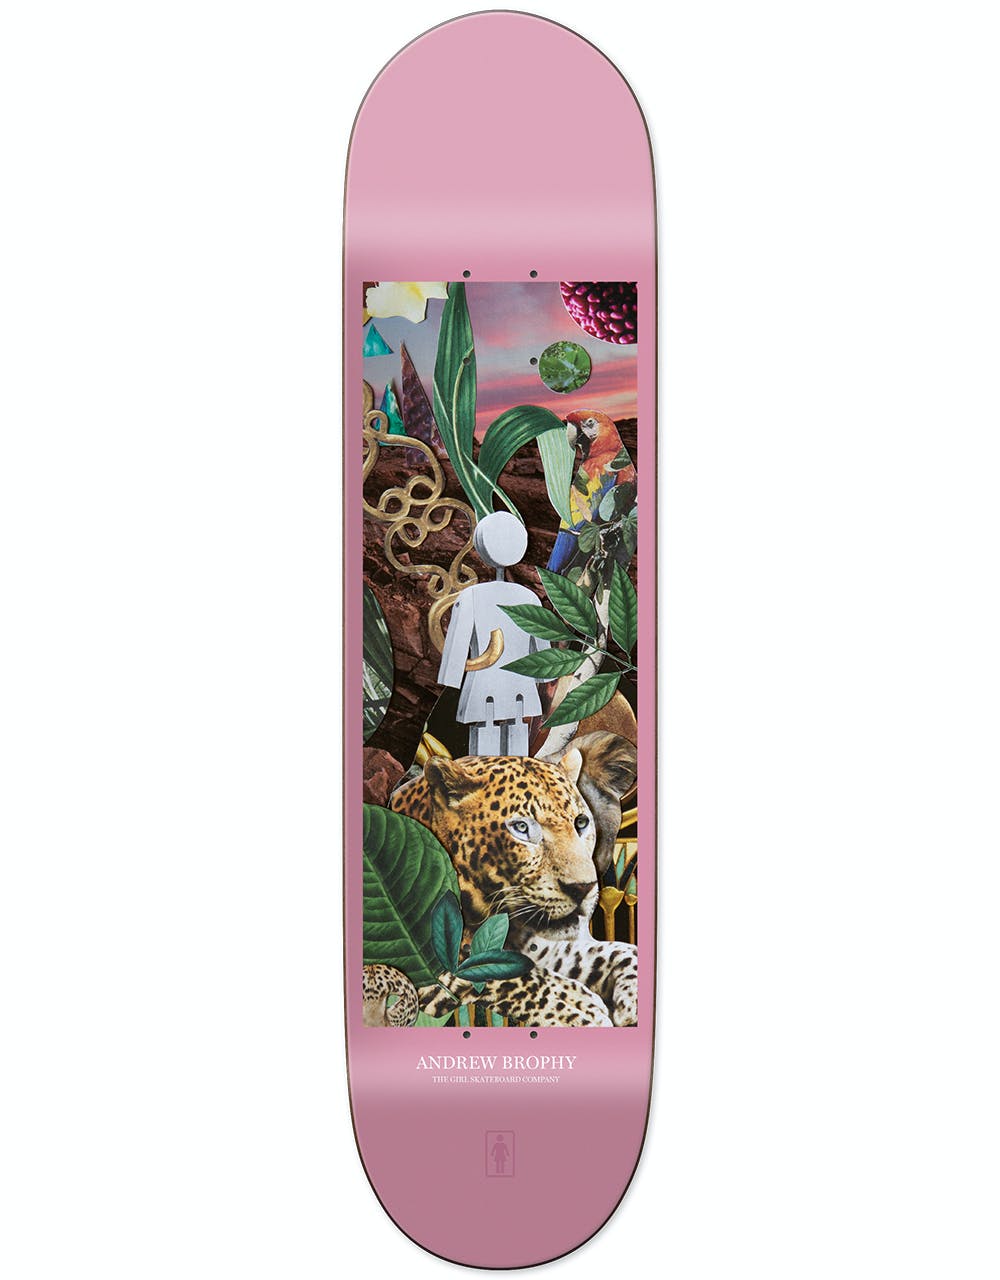 Girl Brohpy Raised by the Jungle Skateboard Deck - 8.25"